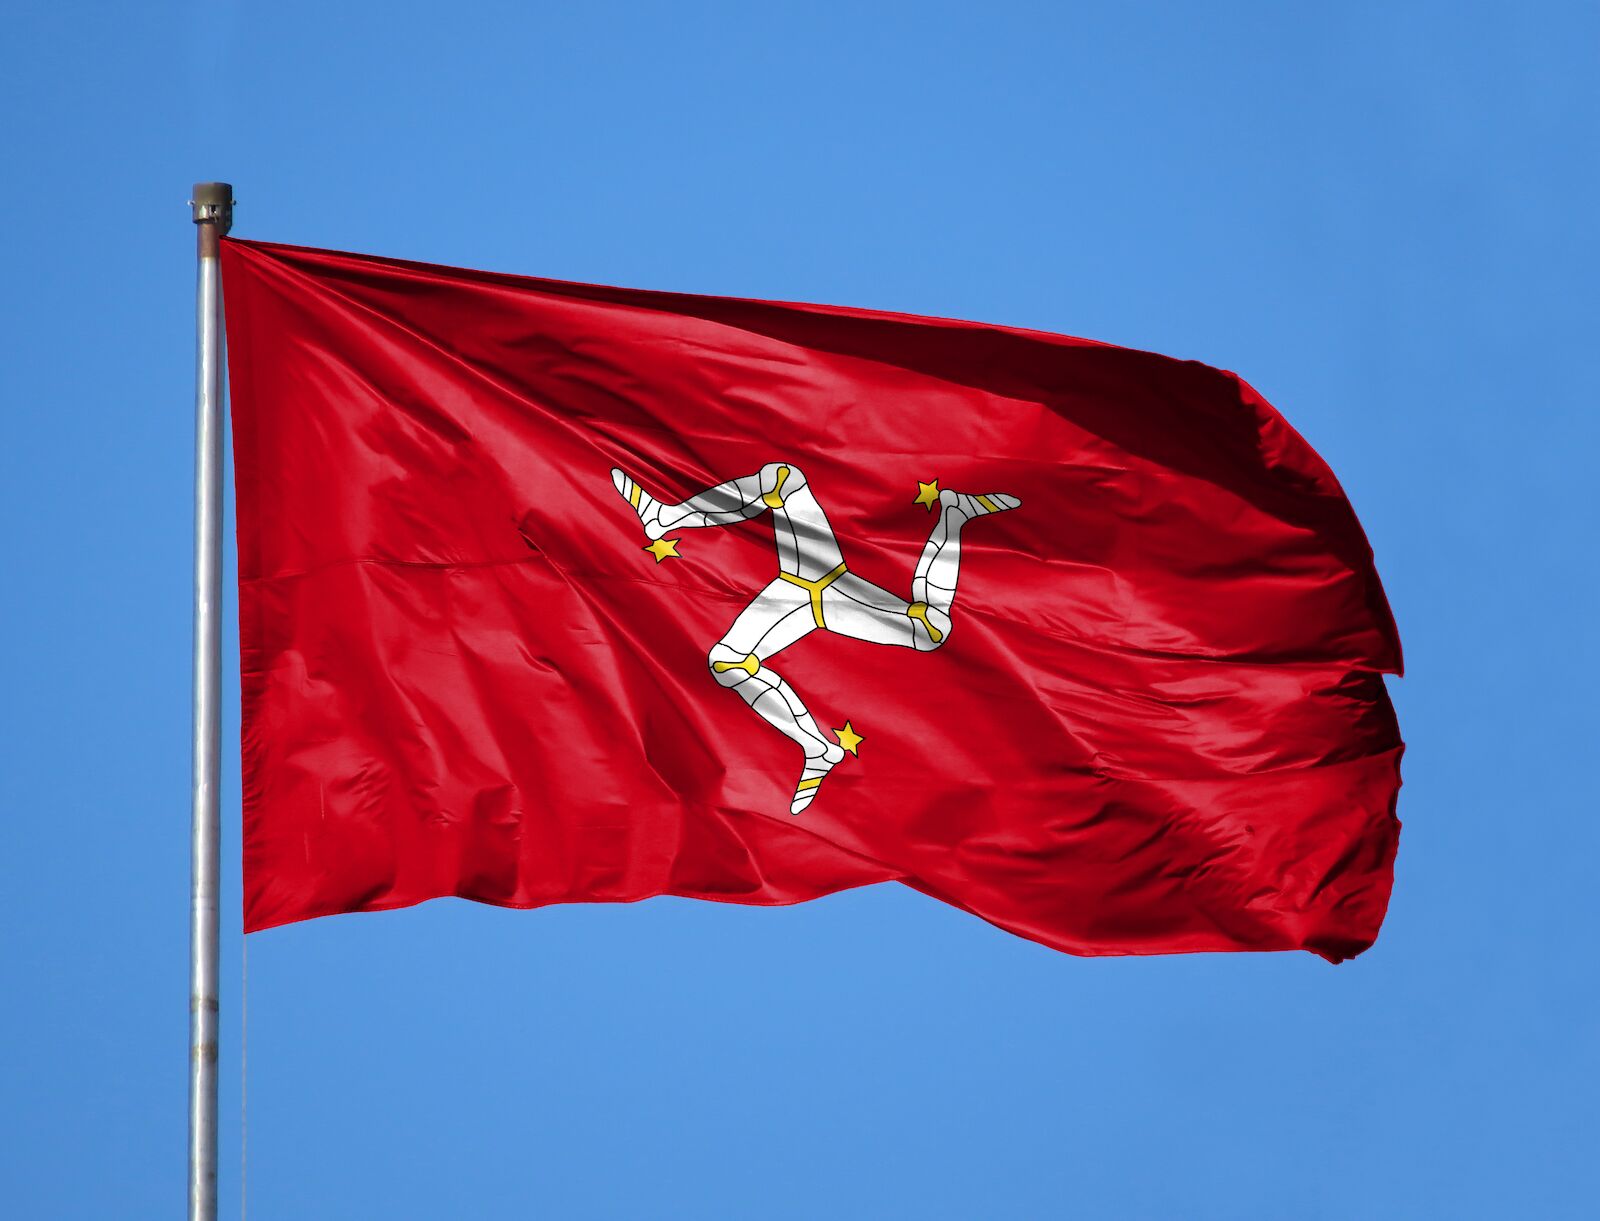 Celtic flags: The Isle of Man. The flag of the Isle of Man is red with a triskelion of three legs with golden spurs